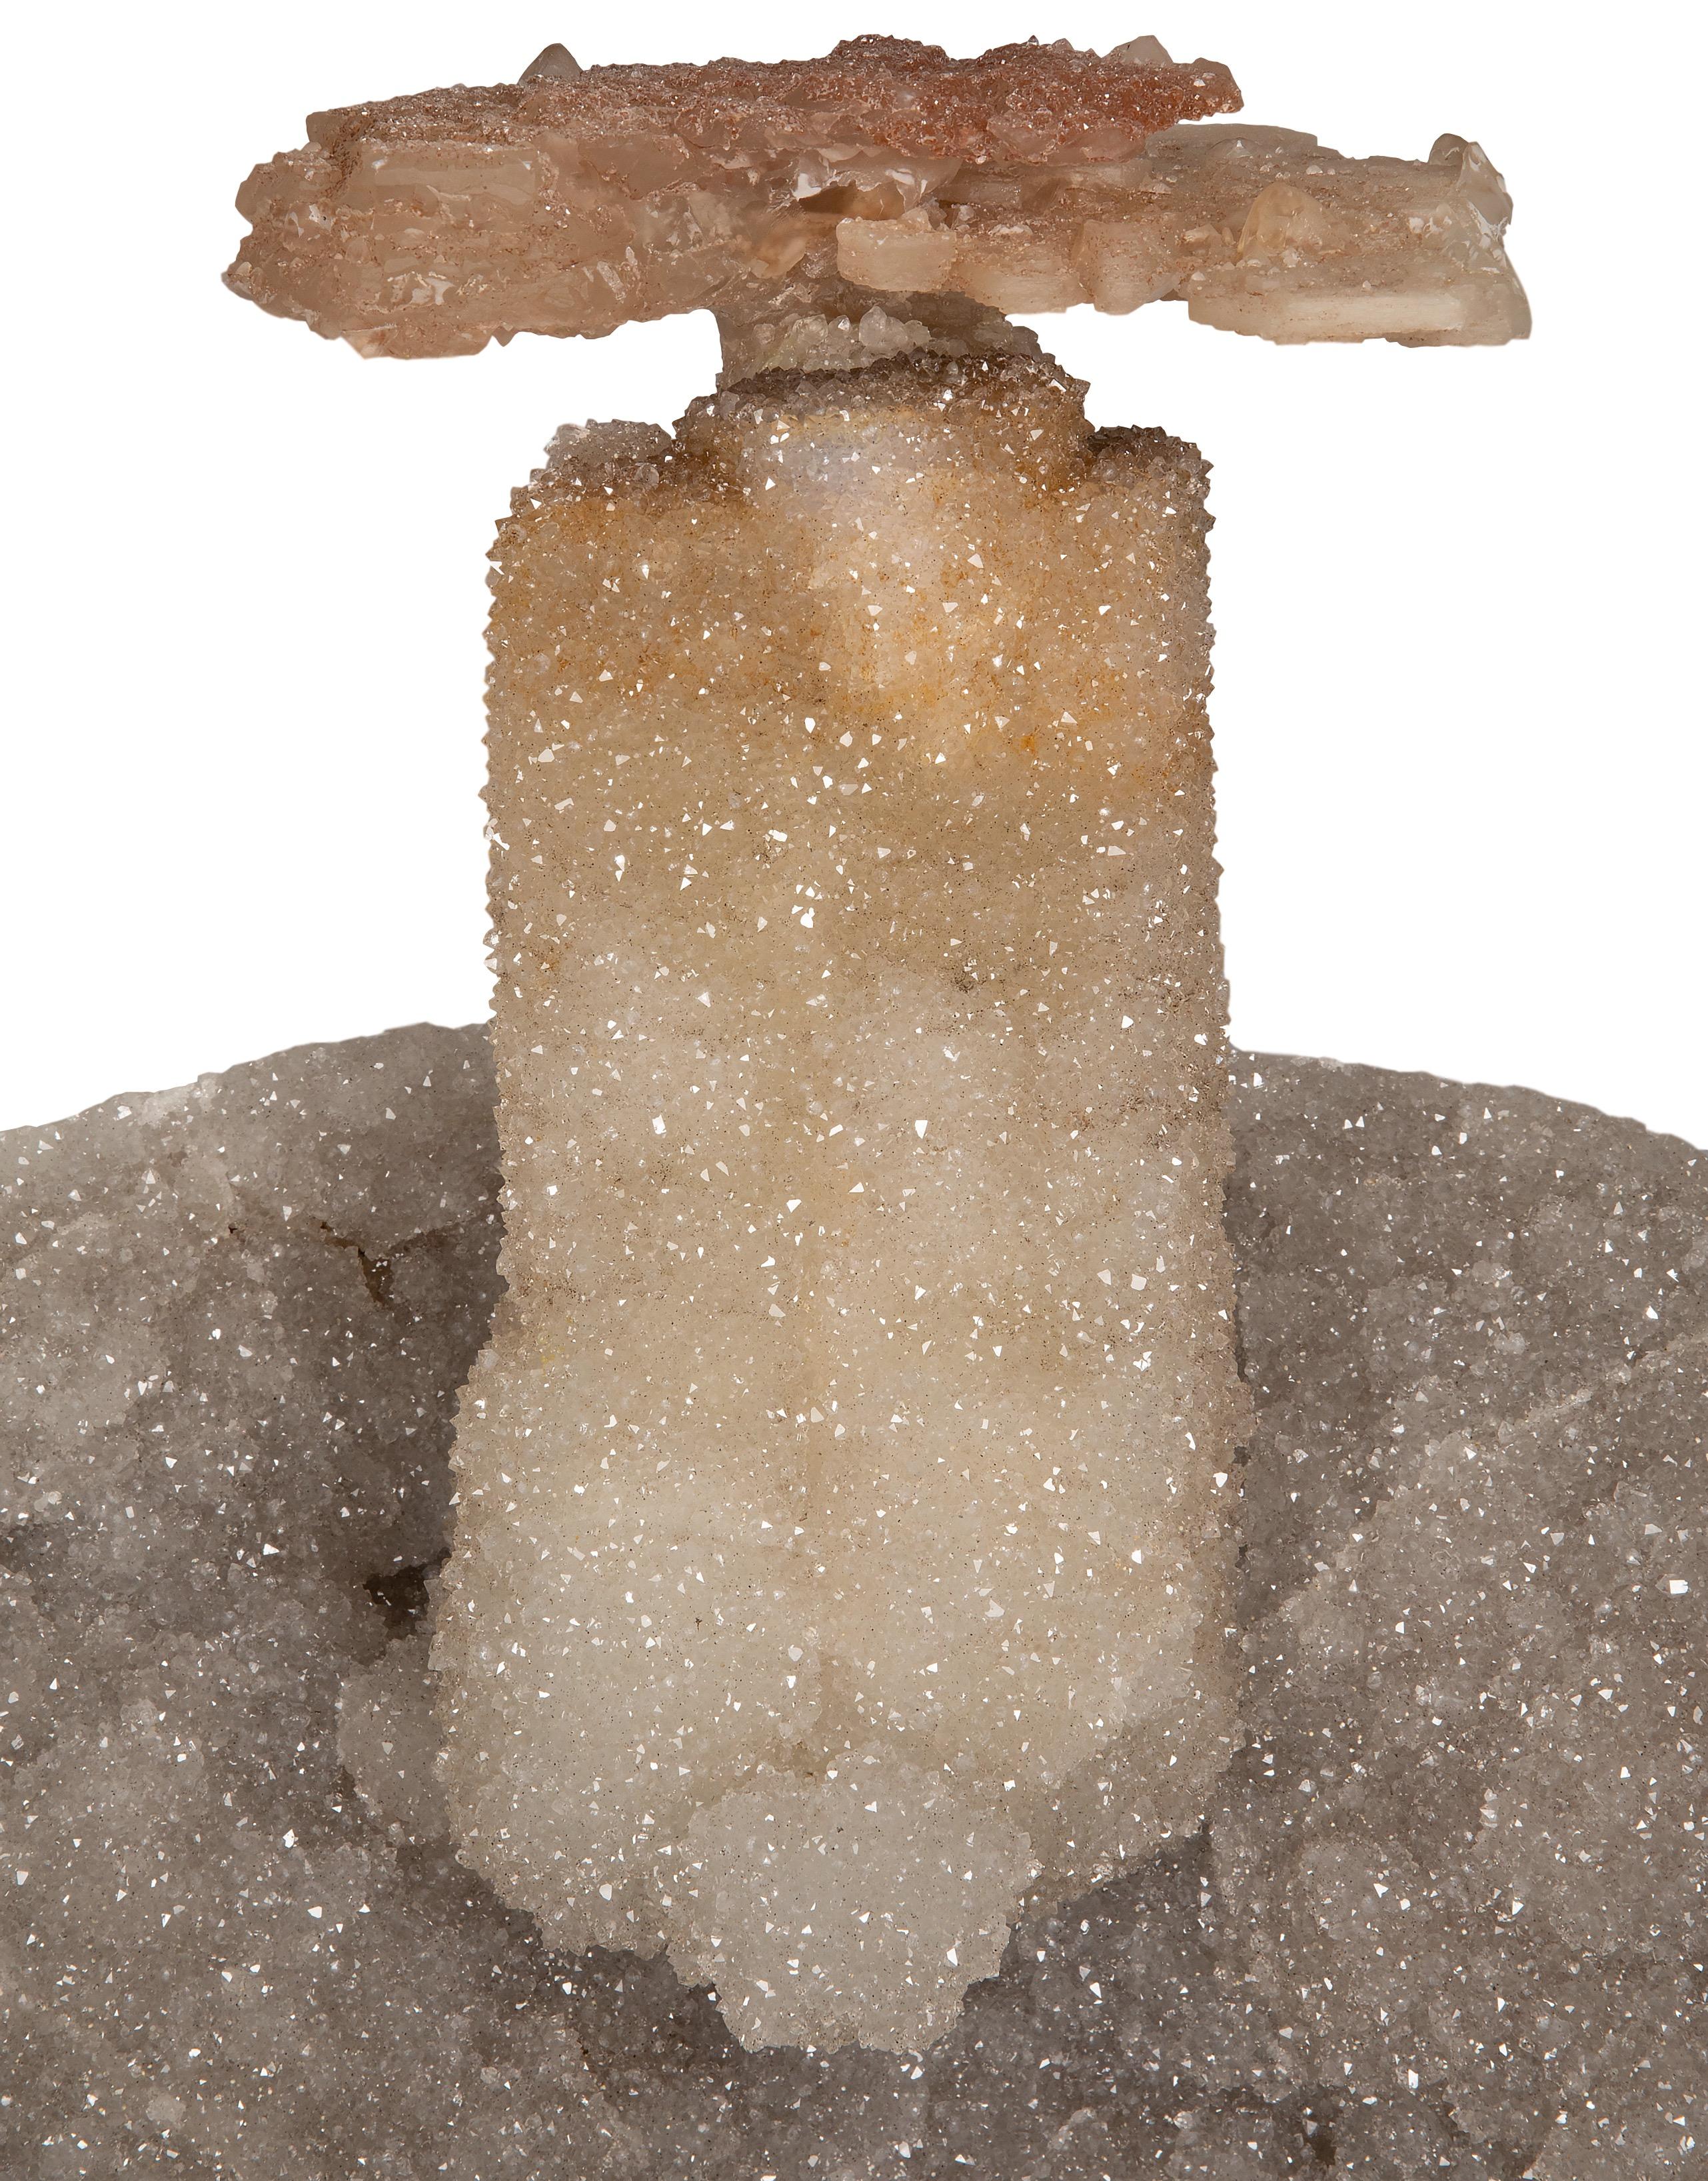 18th Century and Earlier White Quartz “Tree” Sculptural Formation on Metal Stand For Sale